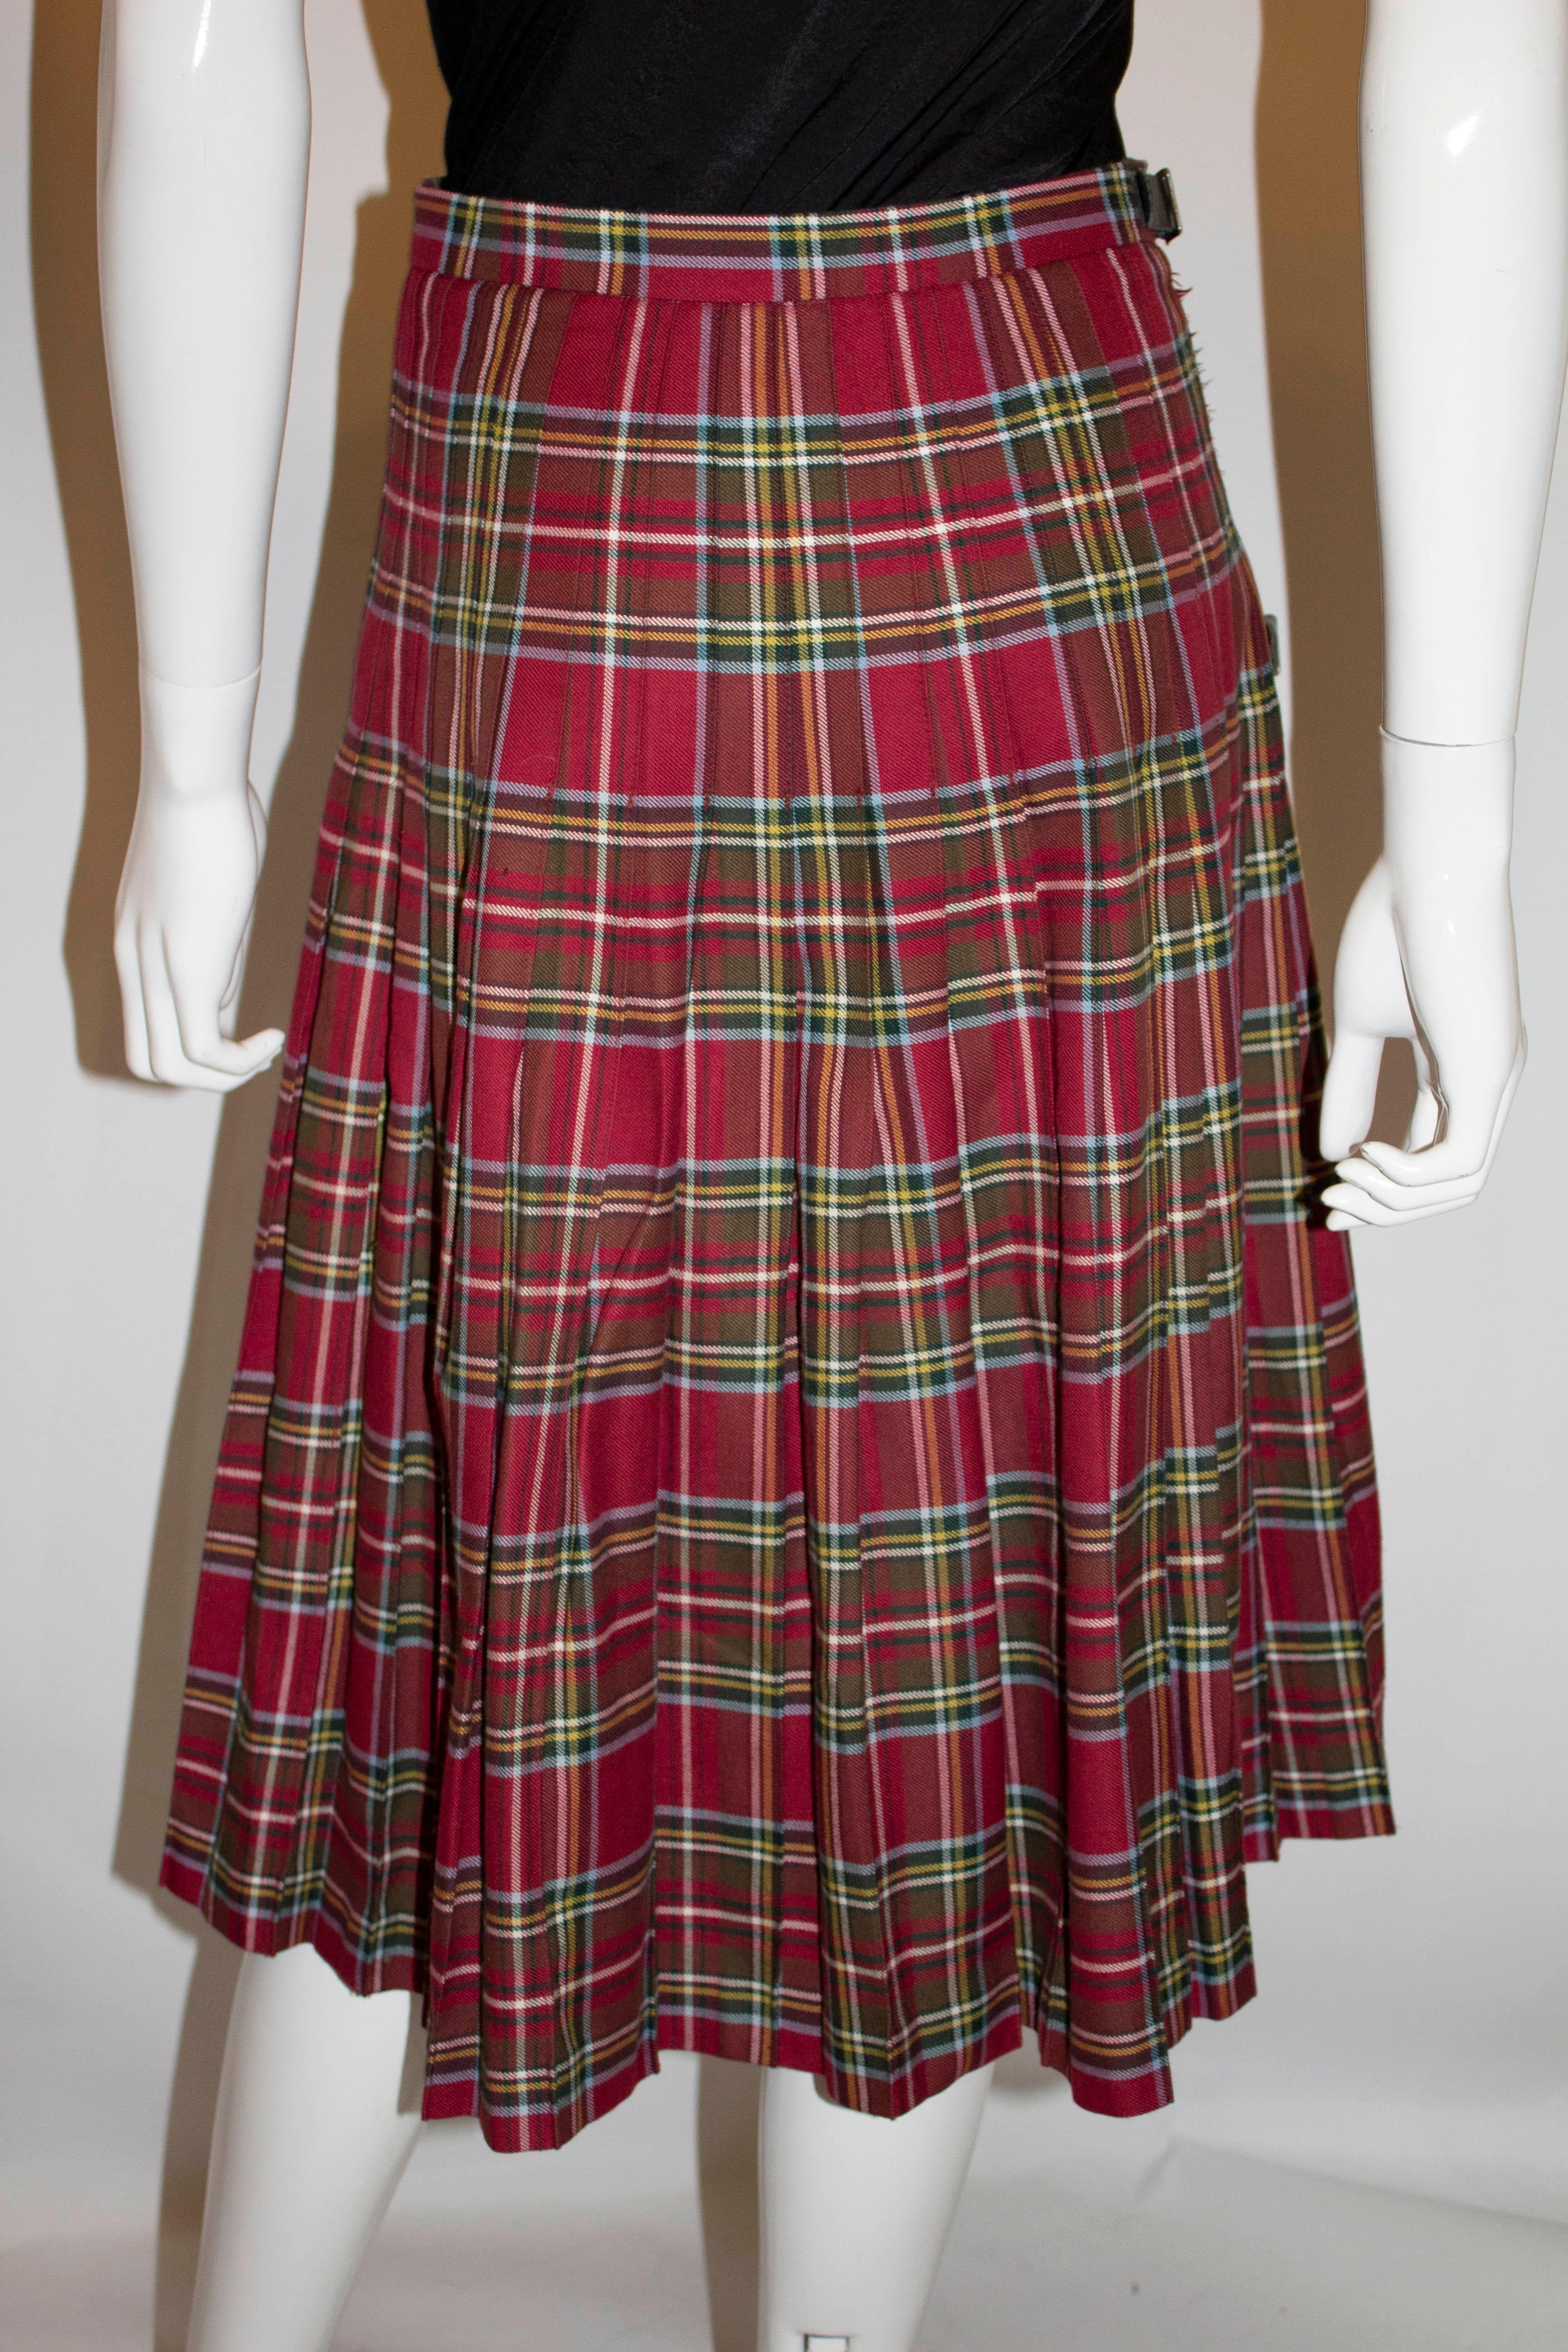 A lovely vintage kilt for Fall by Strathmore of Forfar Scotland . The kilt has a red background with a yellow , green and pale blue stripe.  It has sewn down pleats from the waist band and wraps over. It is unlined. Measurements Waist 28'', length